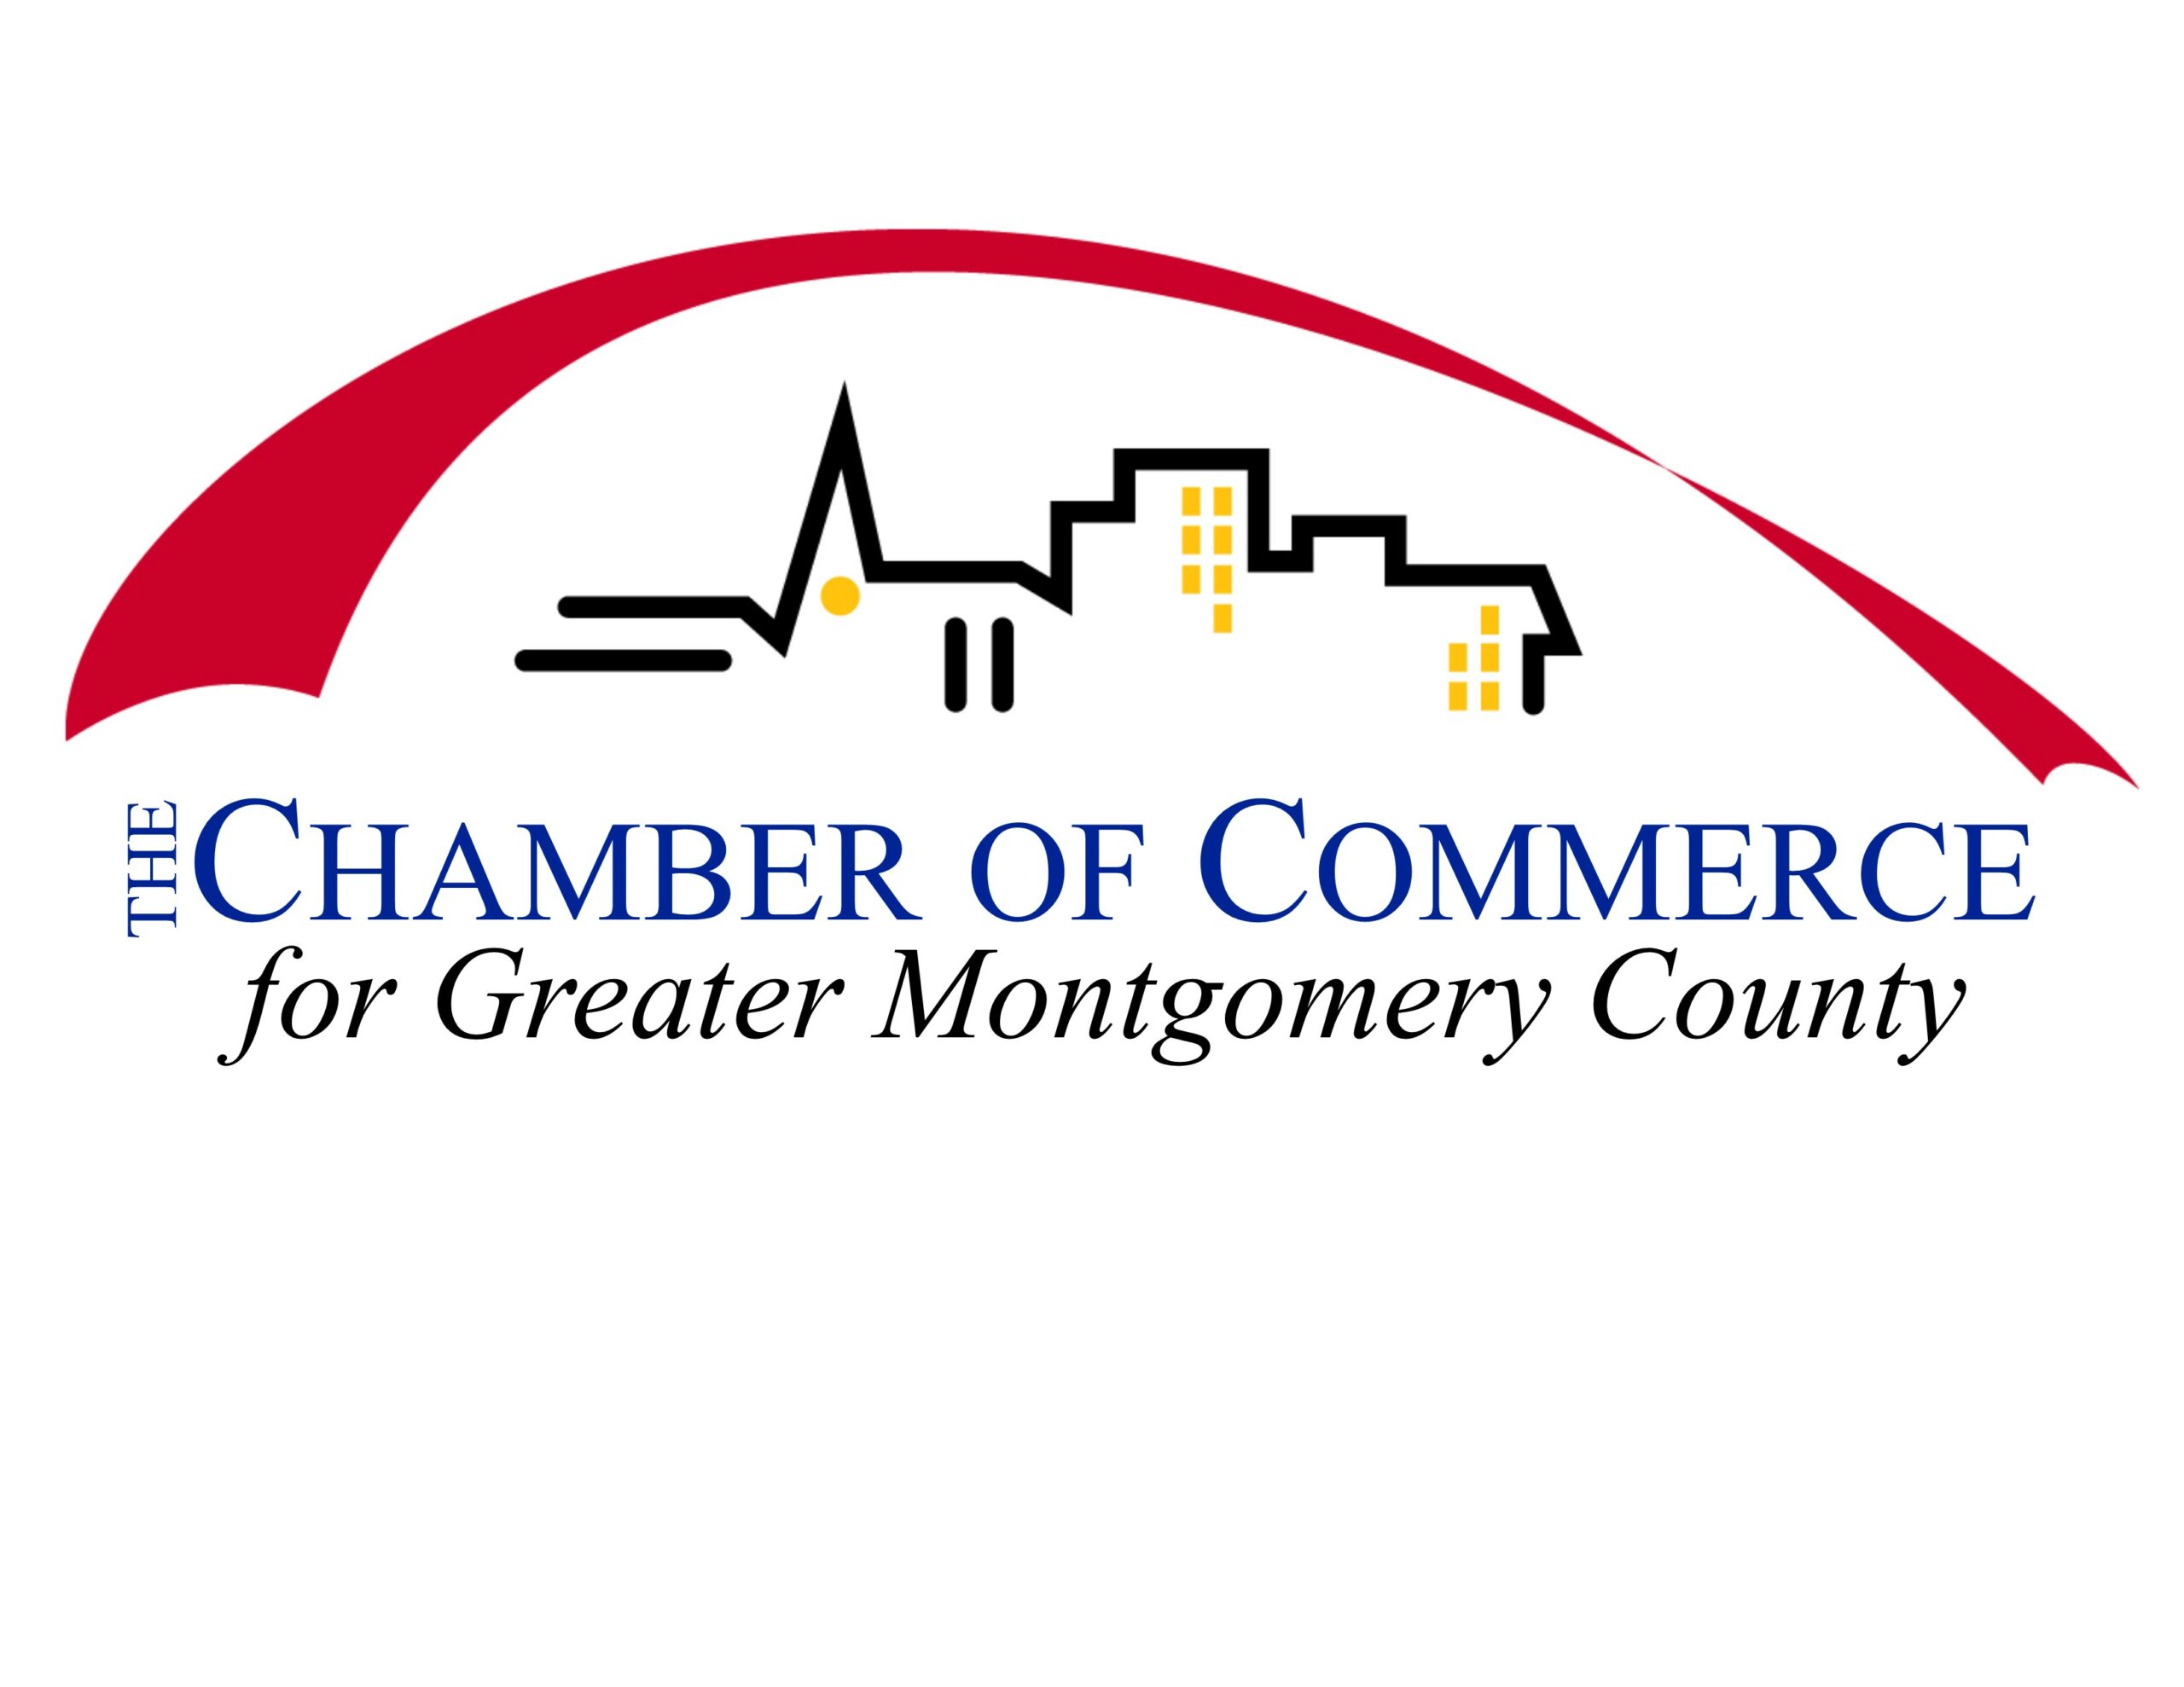 The Chamber of Commerce for Greater Montgomery County Logo